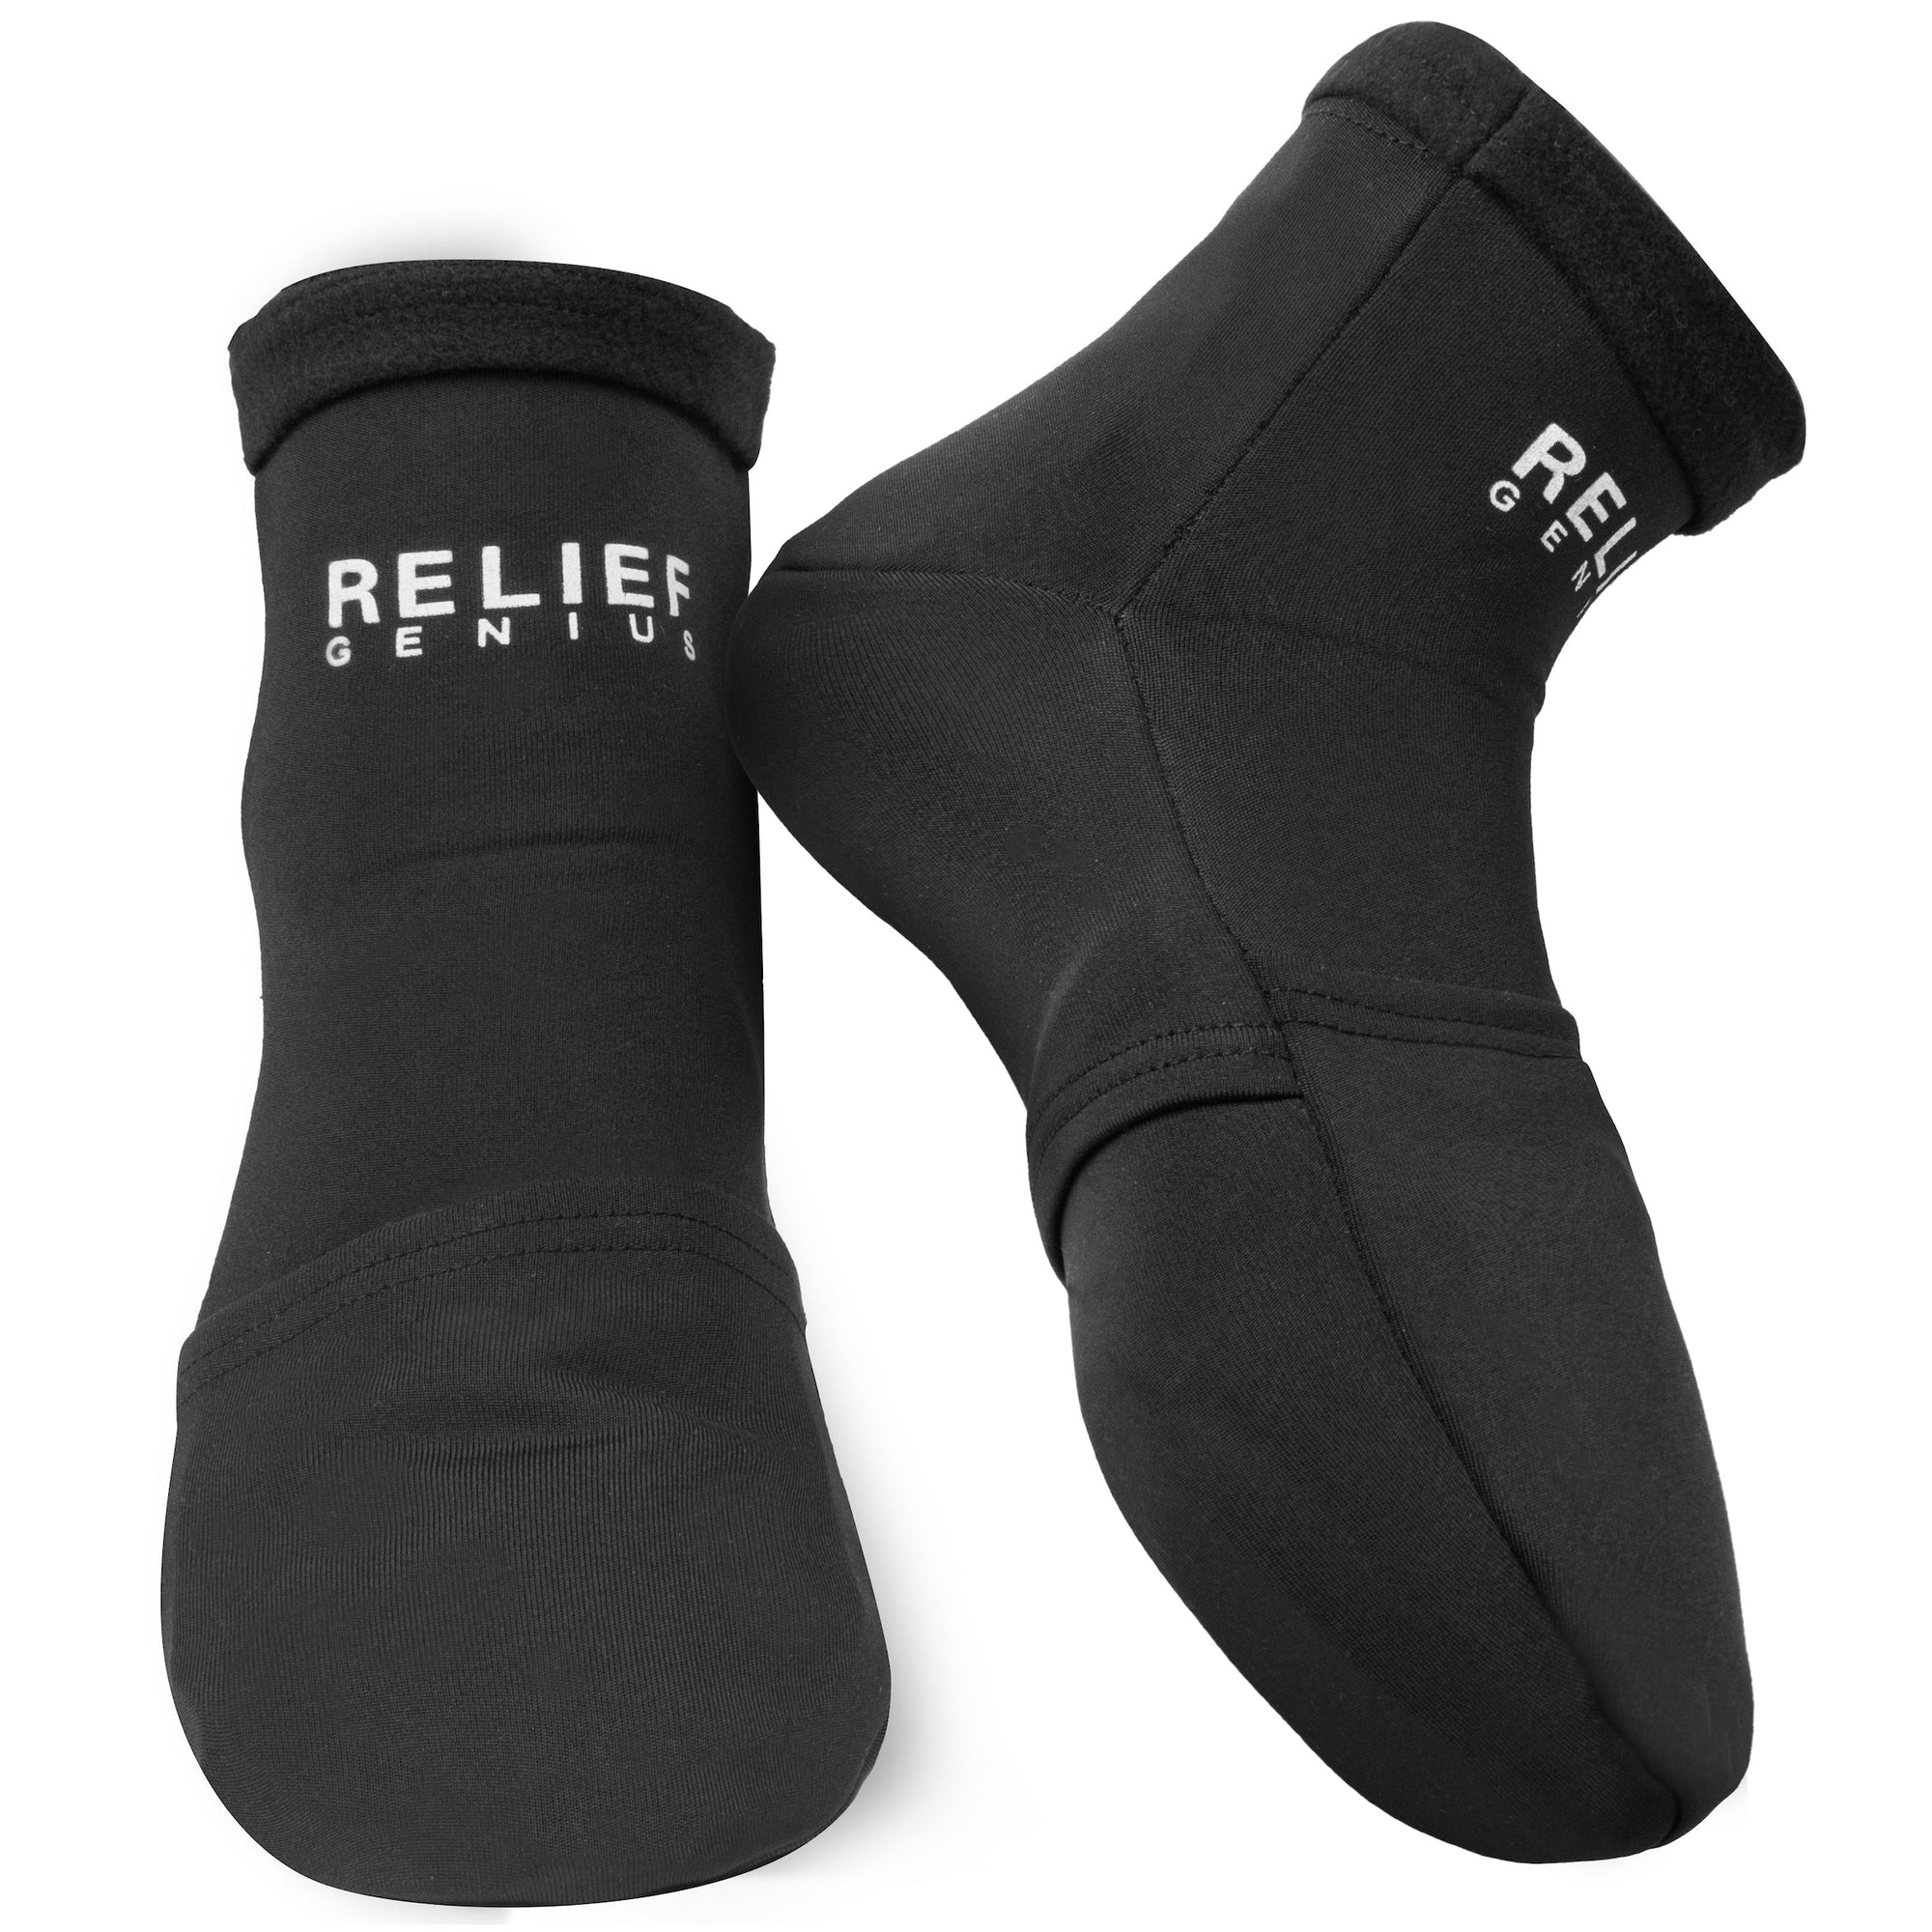 Cold Therapy Socks Black (Large)